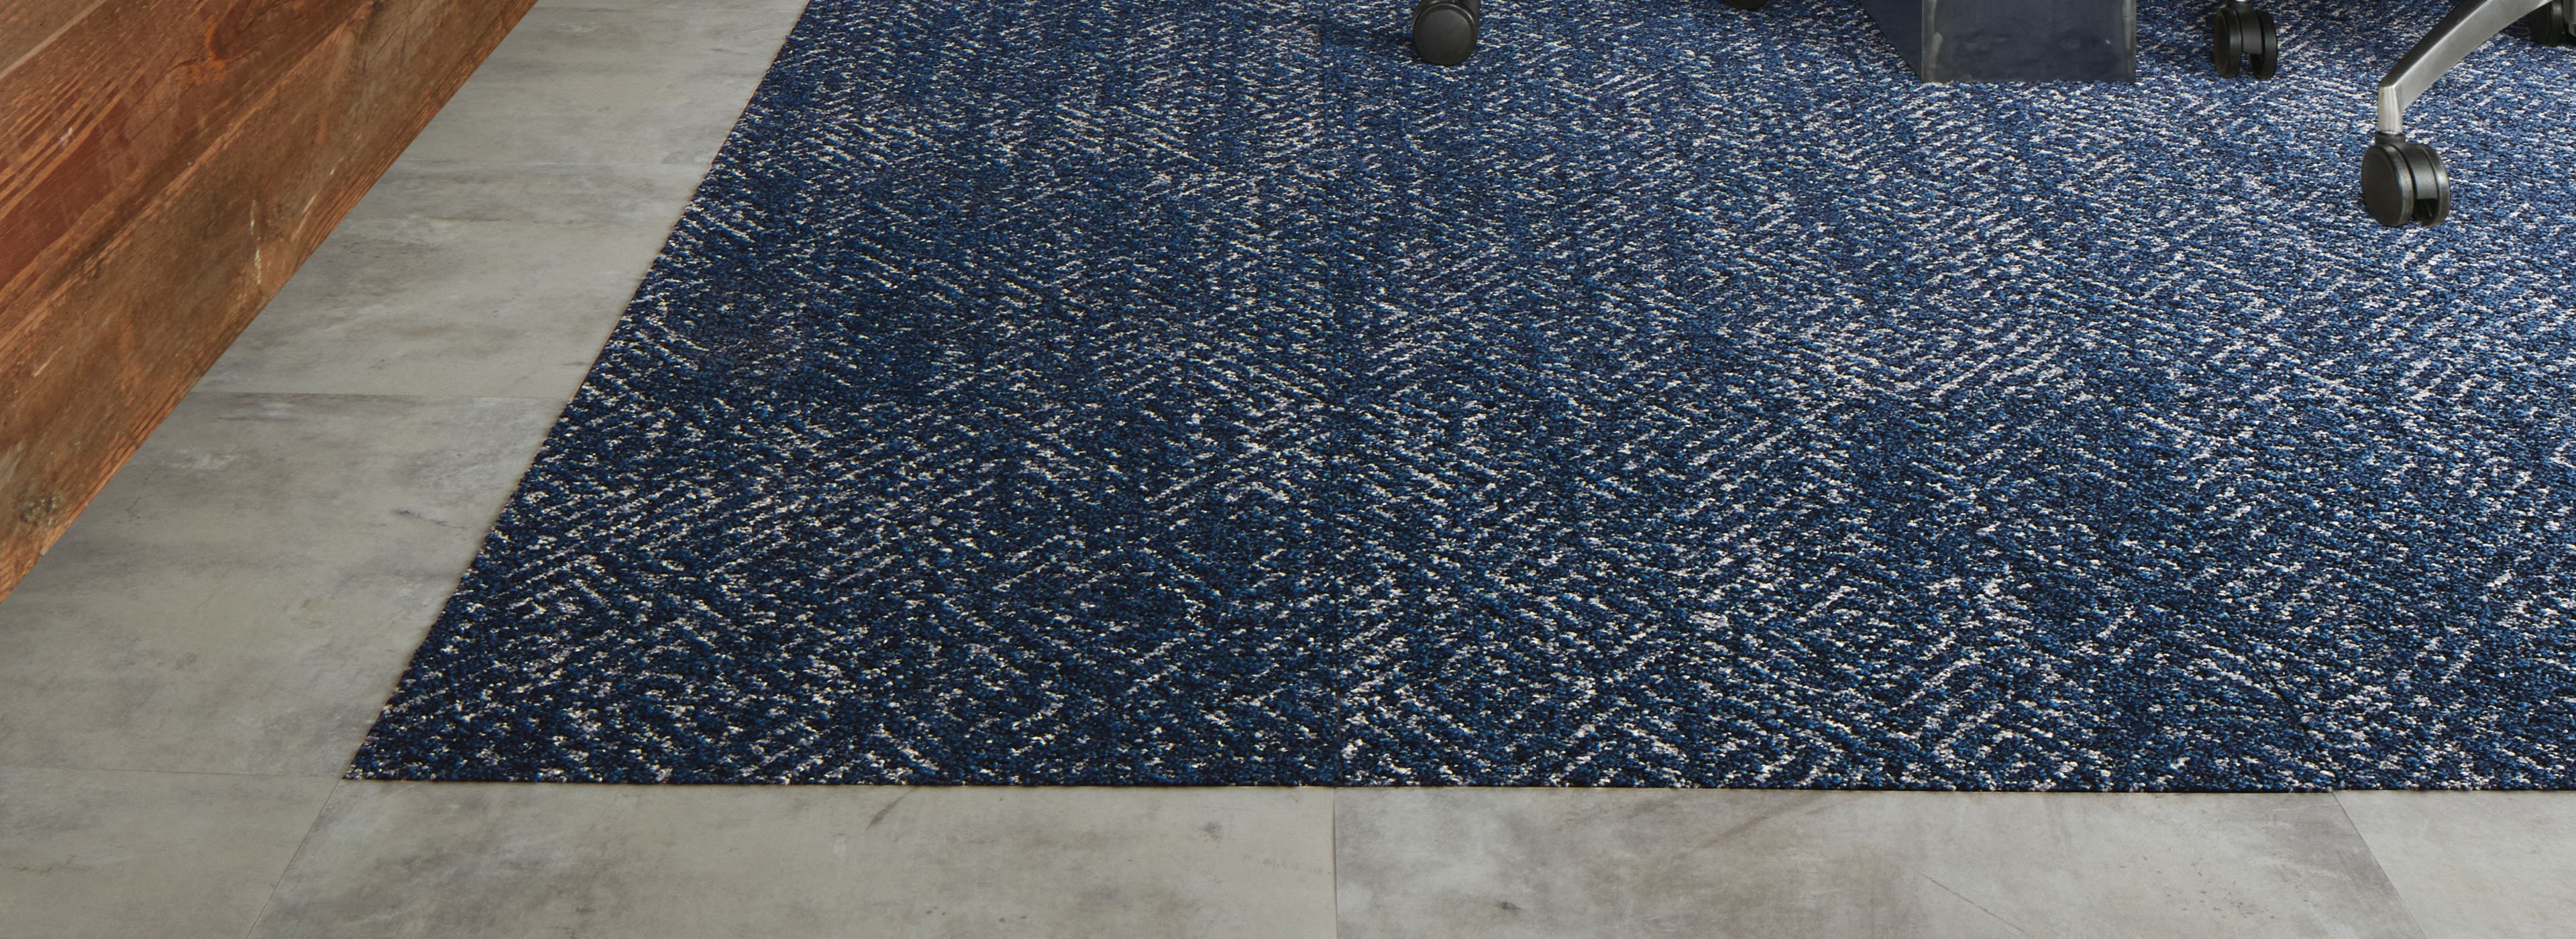 Interface Third Space 309 carpet tile with Textured Stones LVT in meeting room imagen número 1